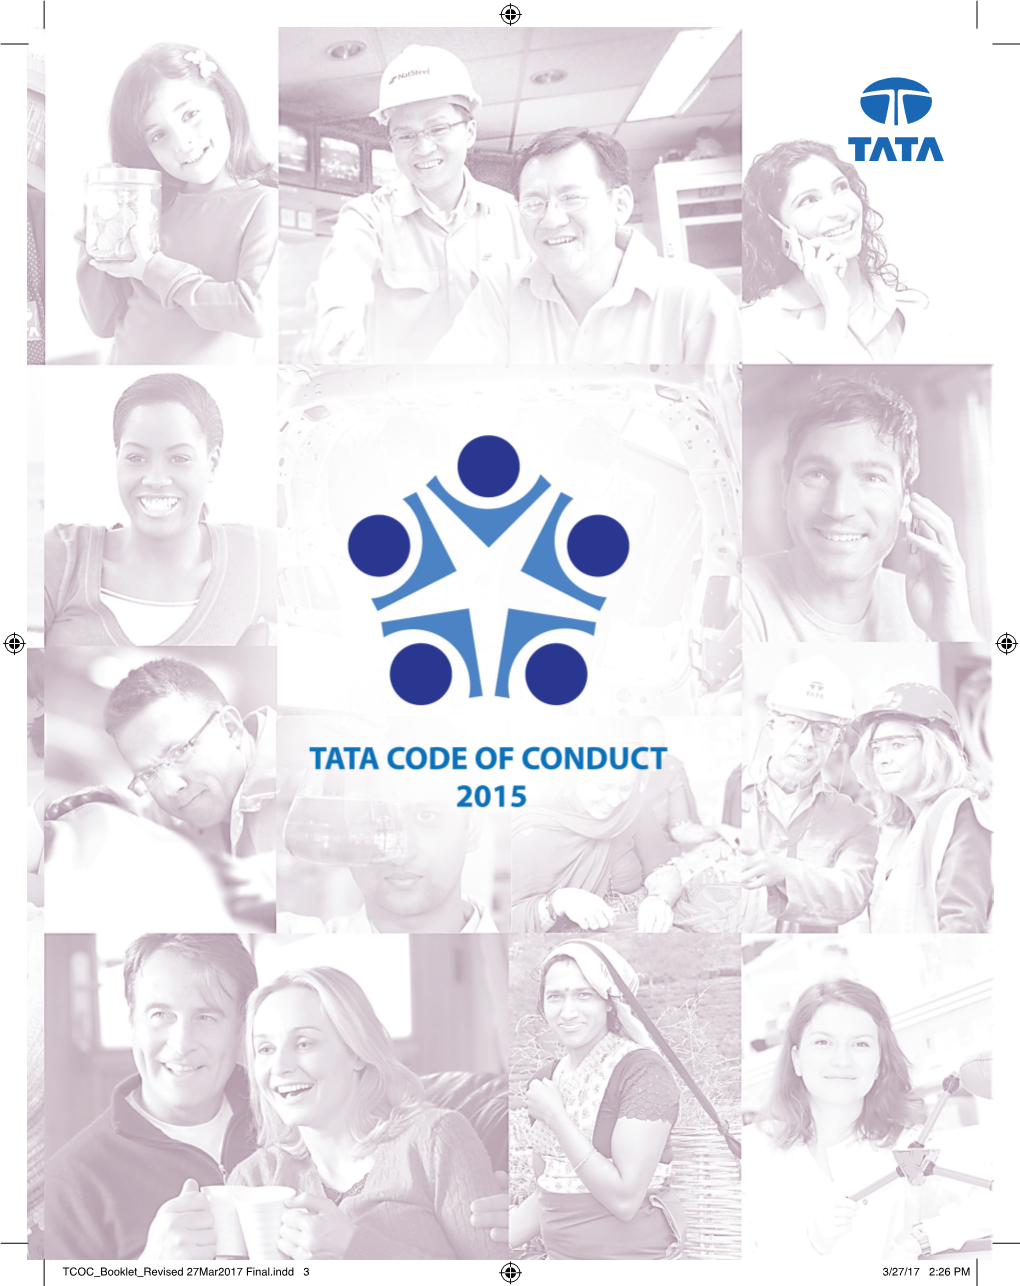 Tata Code of Conduct (TCOC) Or a Code of Conduct That Incorporates All Elements of the TCOC